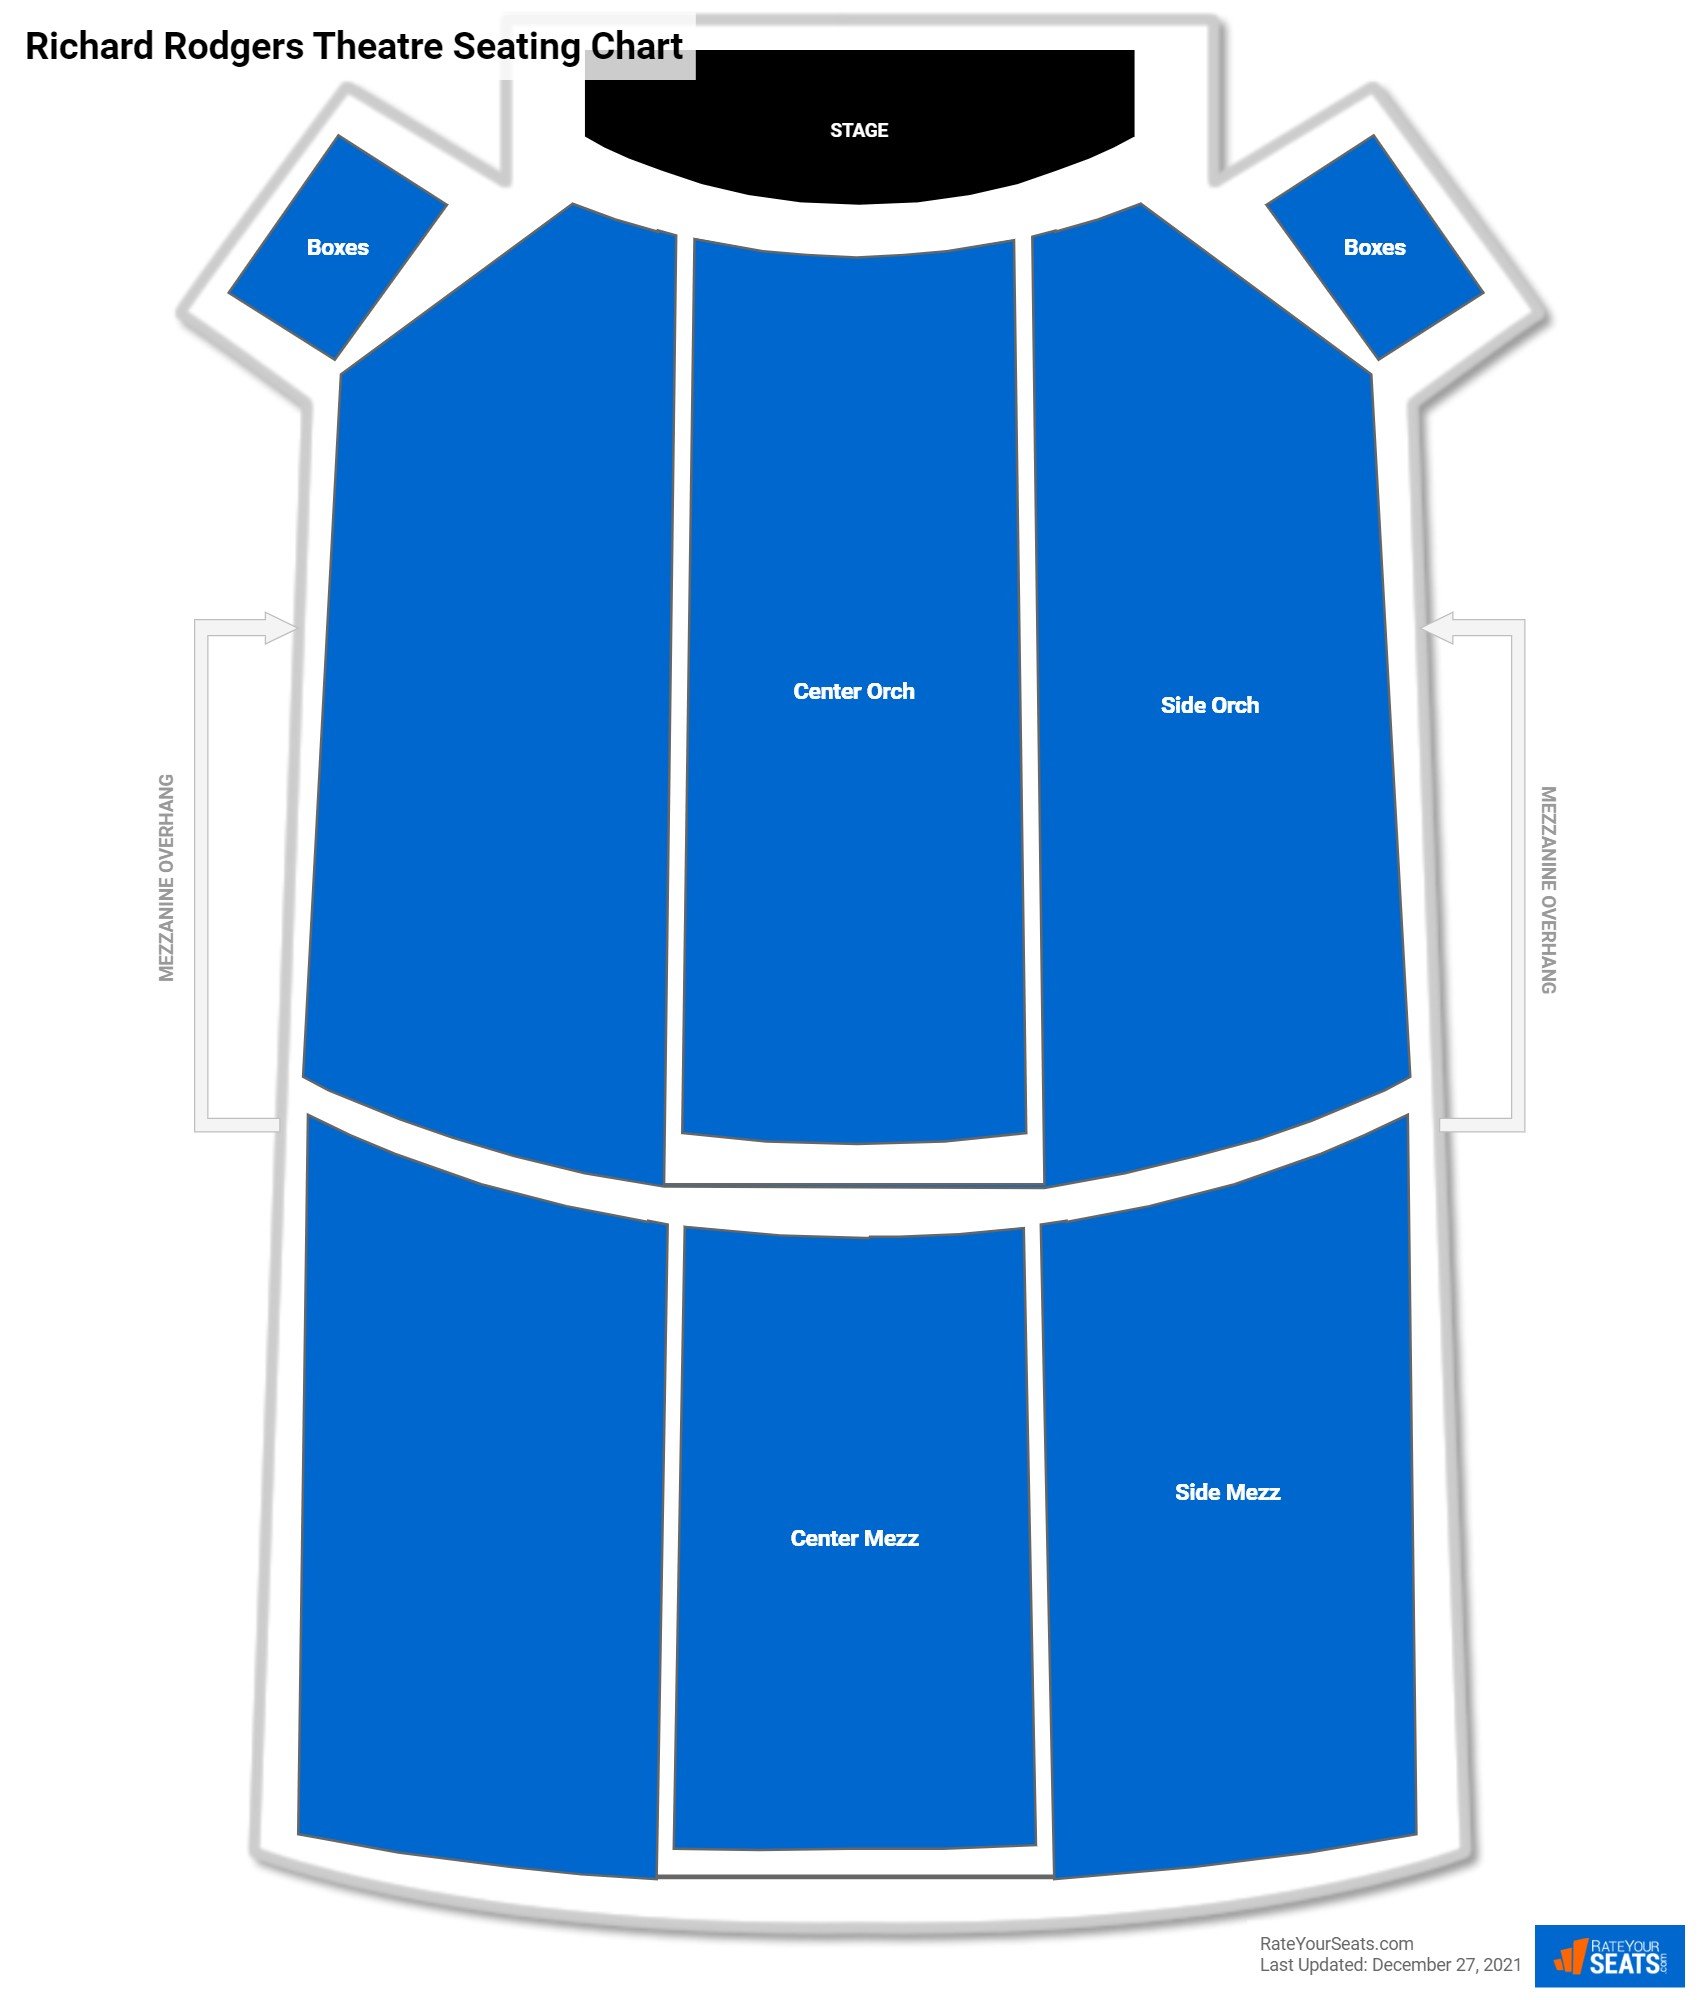 Richard Rodgers Theatre Theater Seating Chart